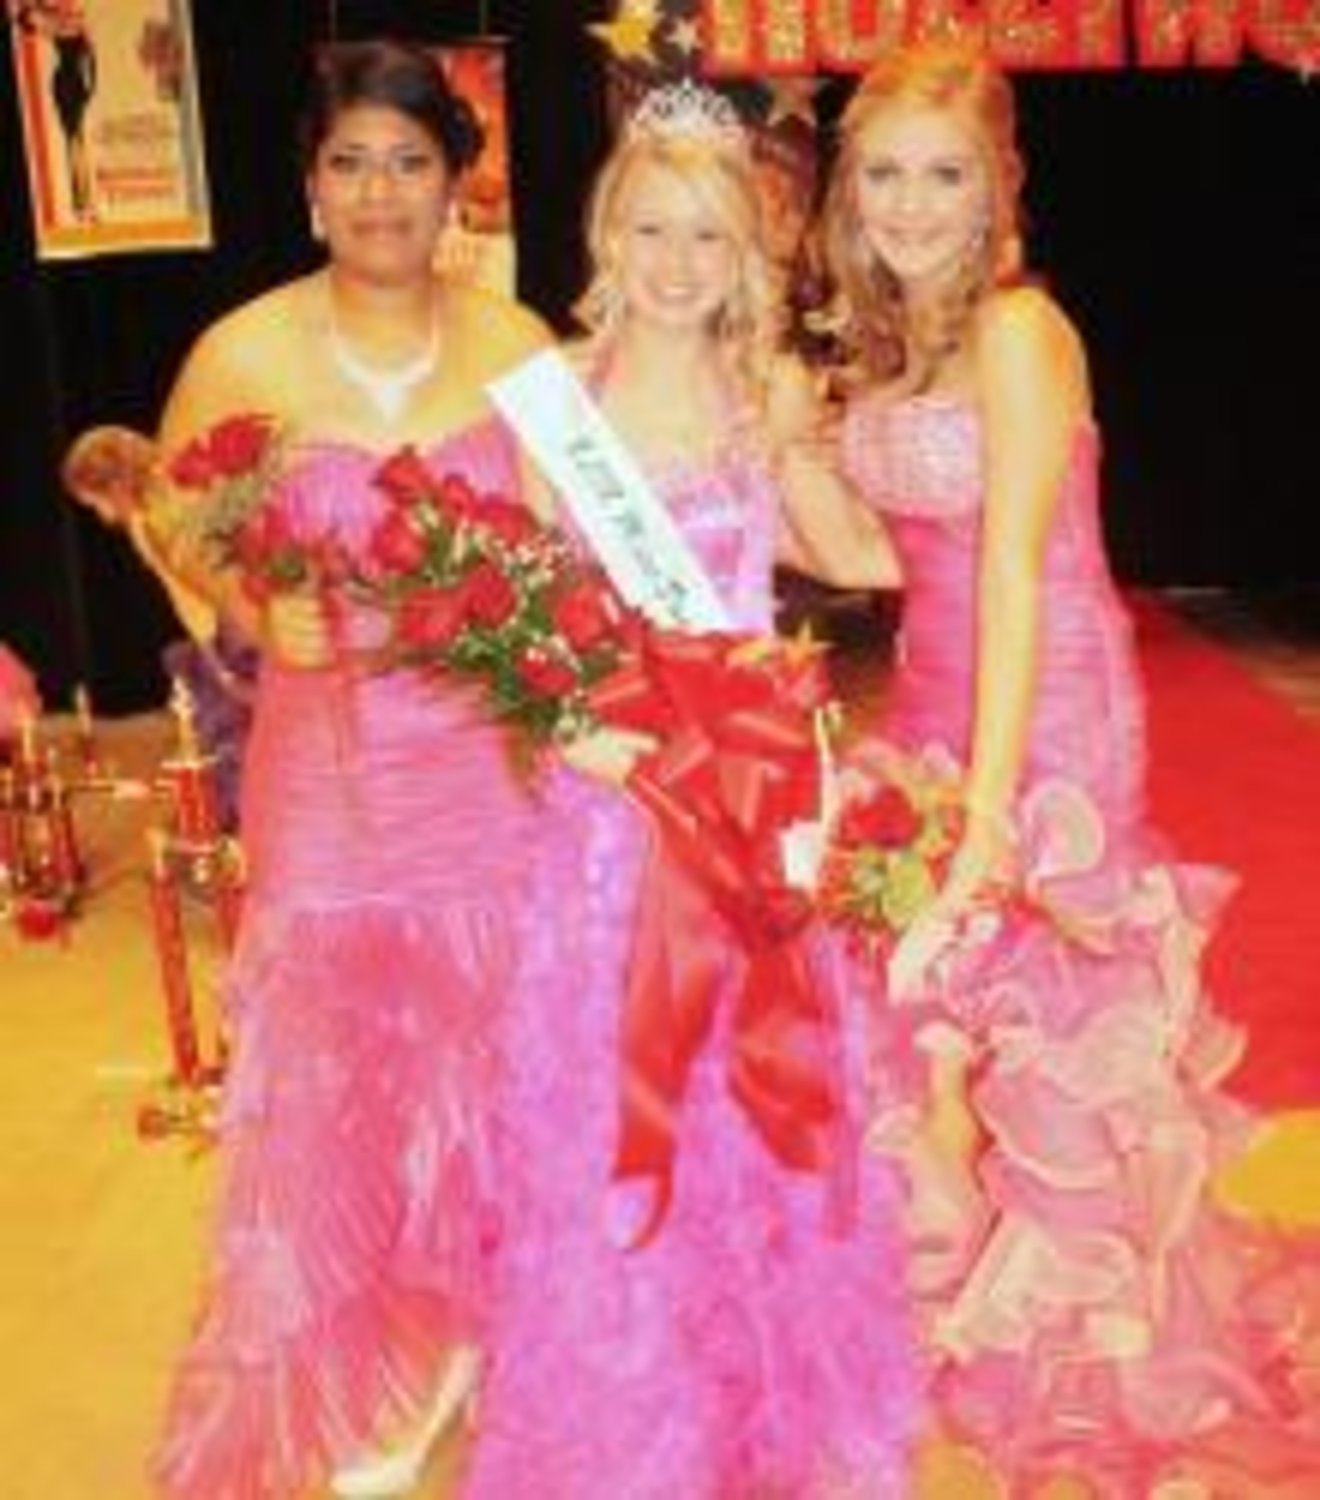 The Miss Dogwood contestants pose with their awards. From left to right: First runner-up Maria Ramirez, Miss Dogwood Bethany Webber and second runner-up Shayna Cleveland.